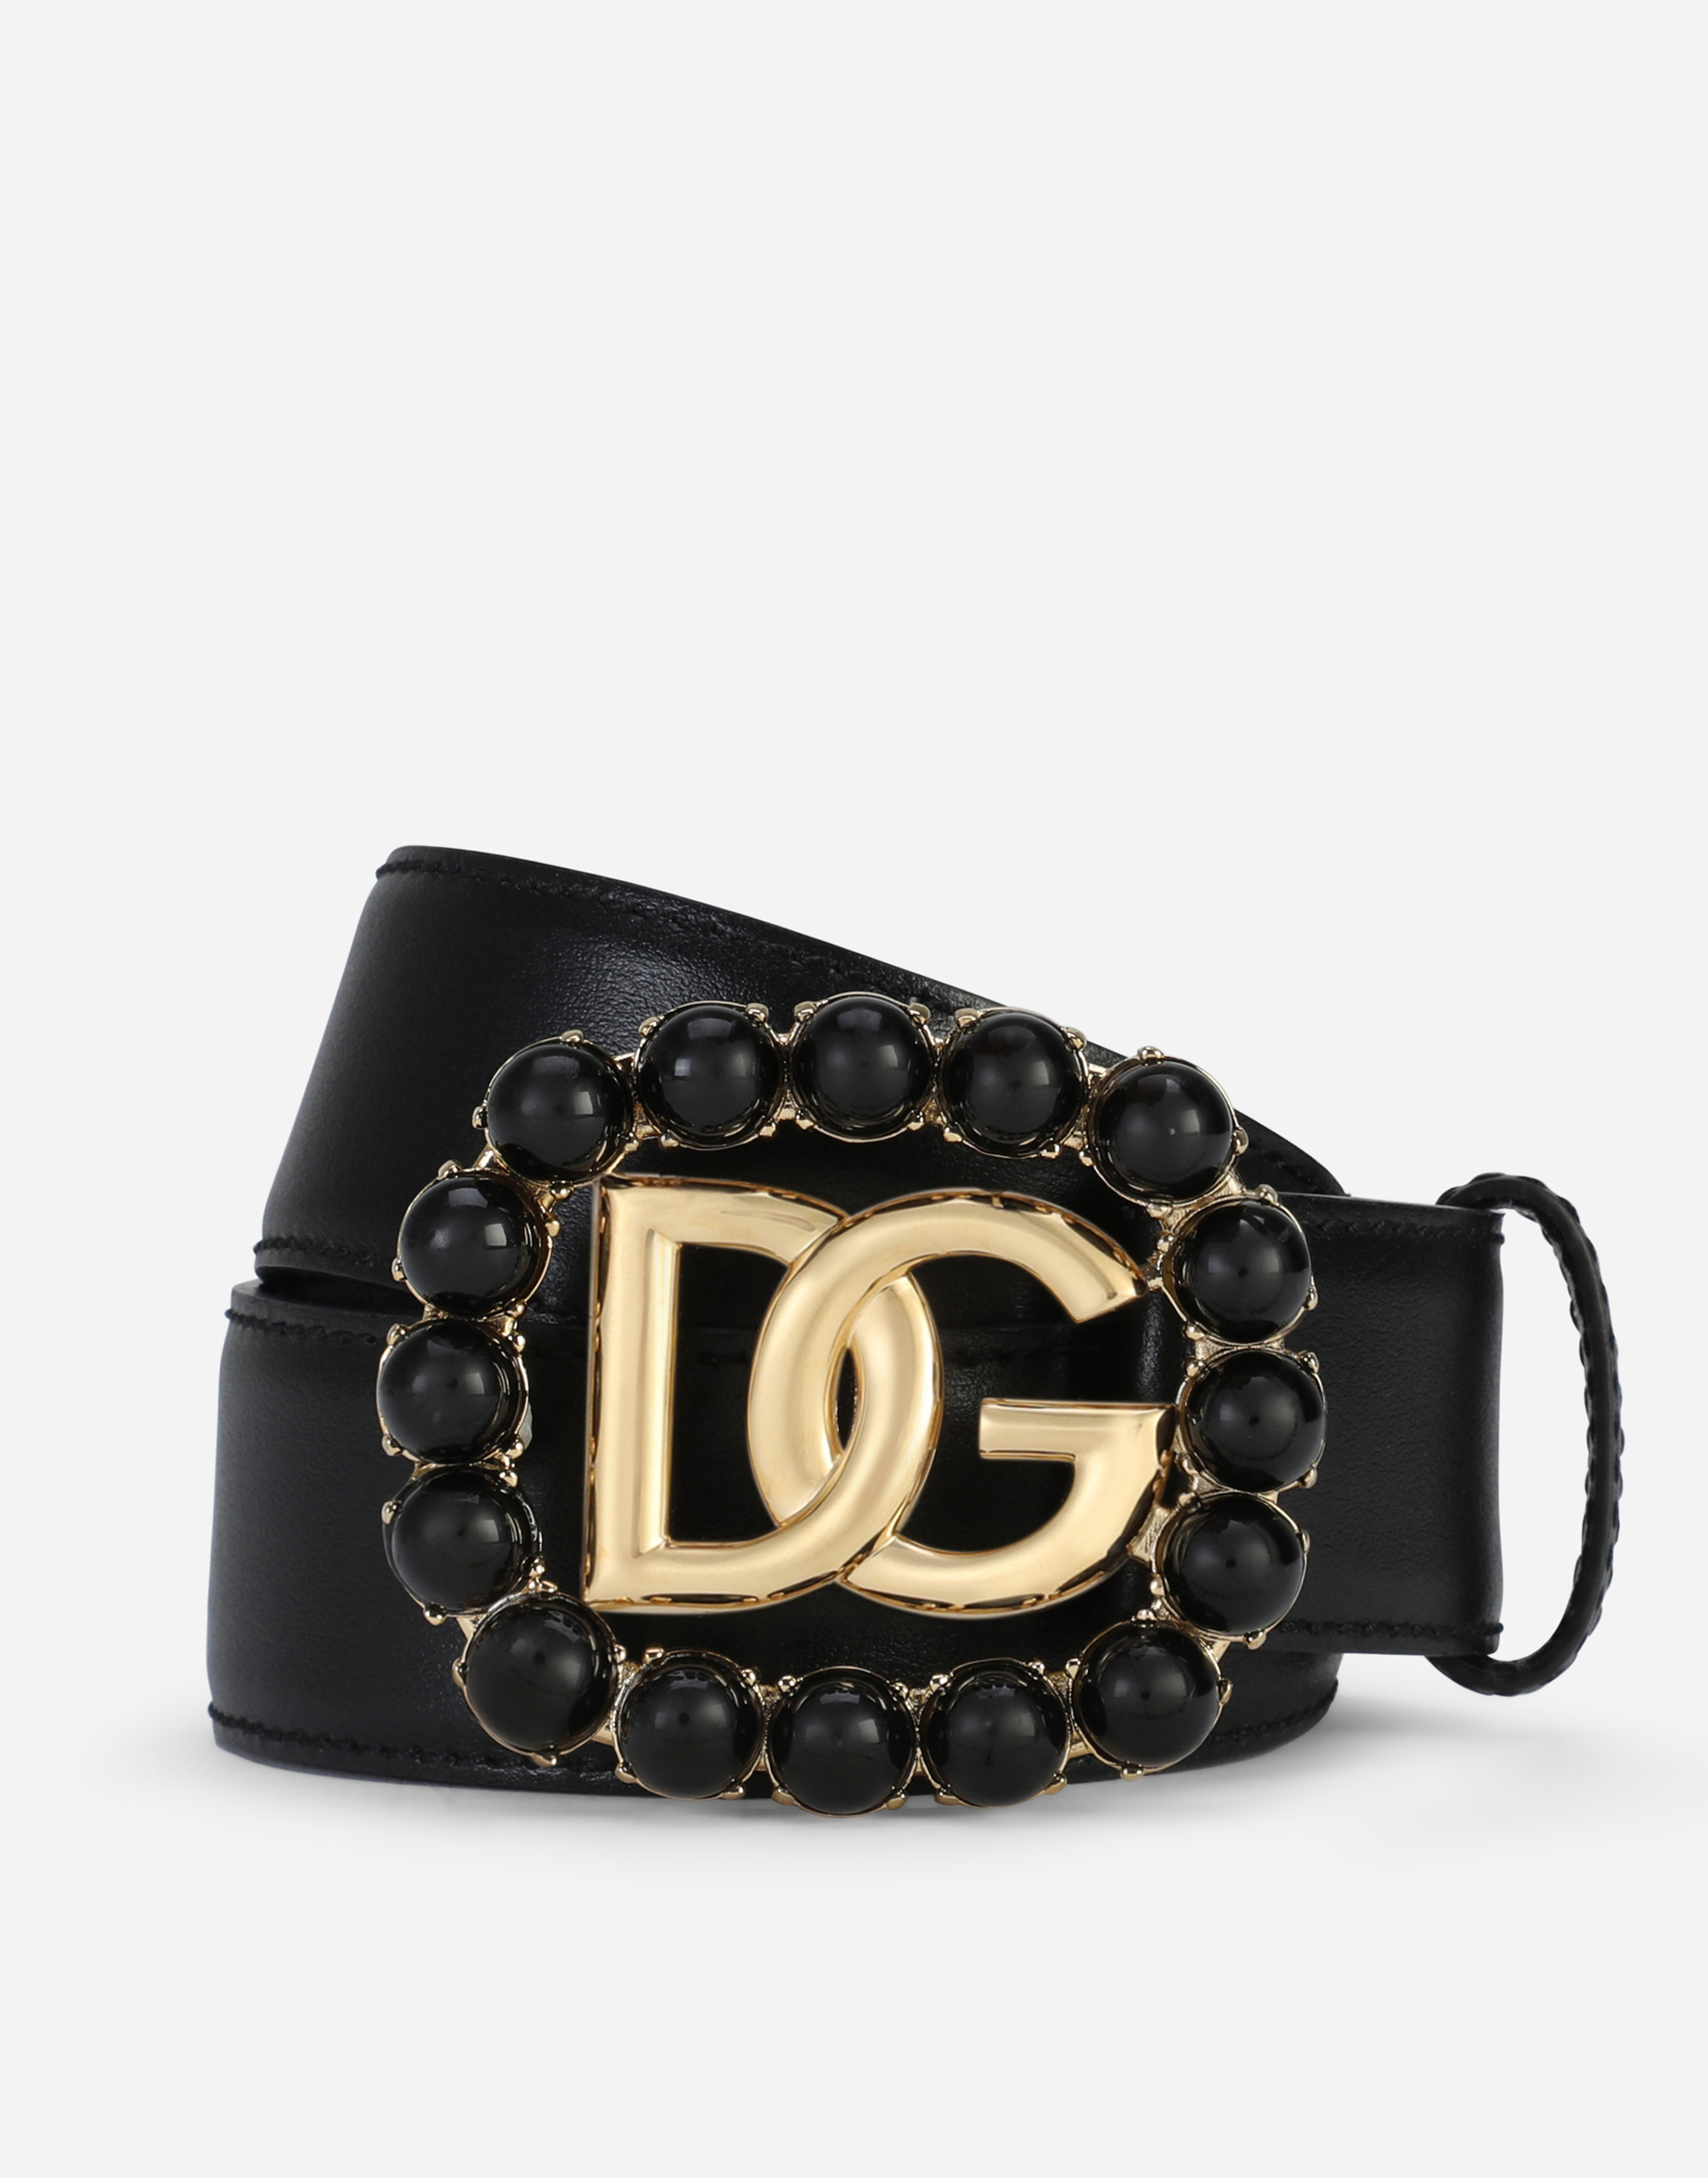 Calfskin belt with DG logo with black pearls in Black